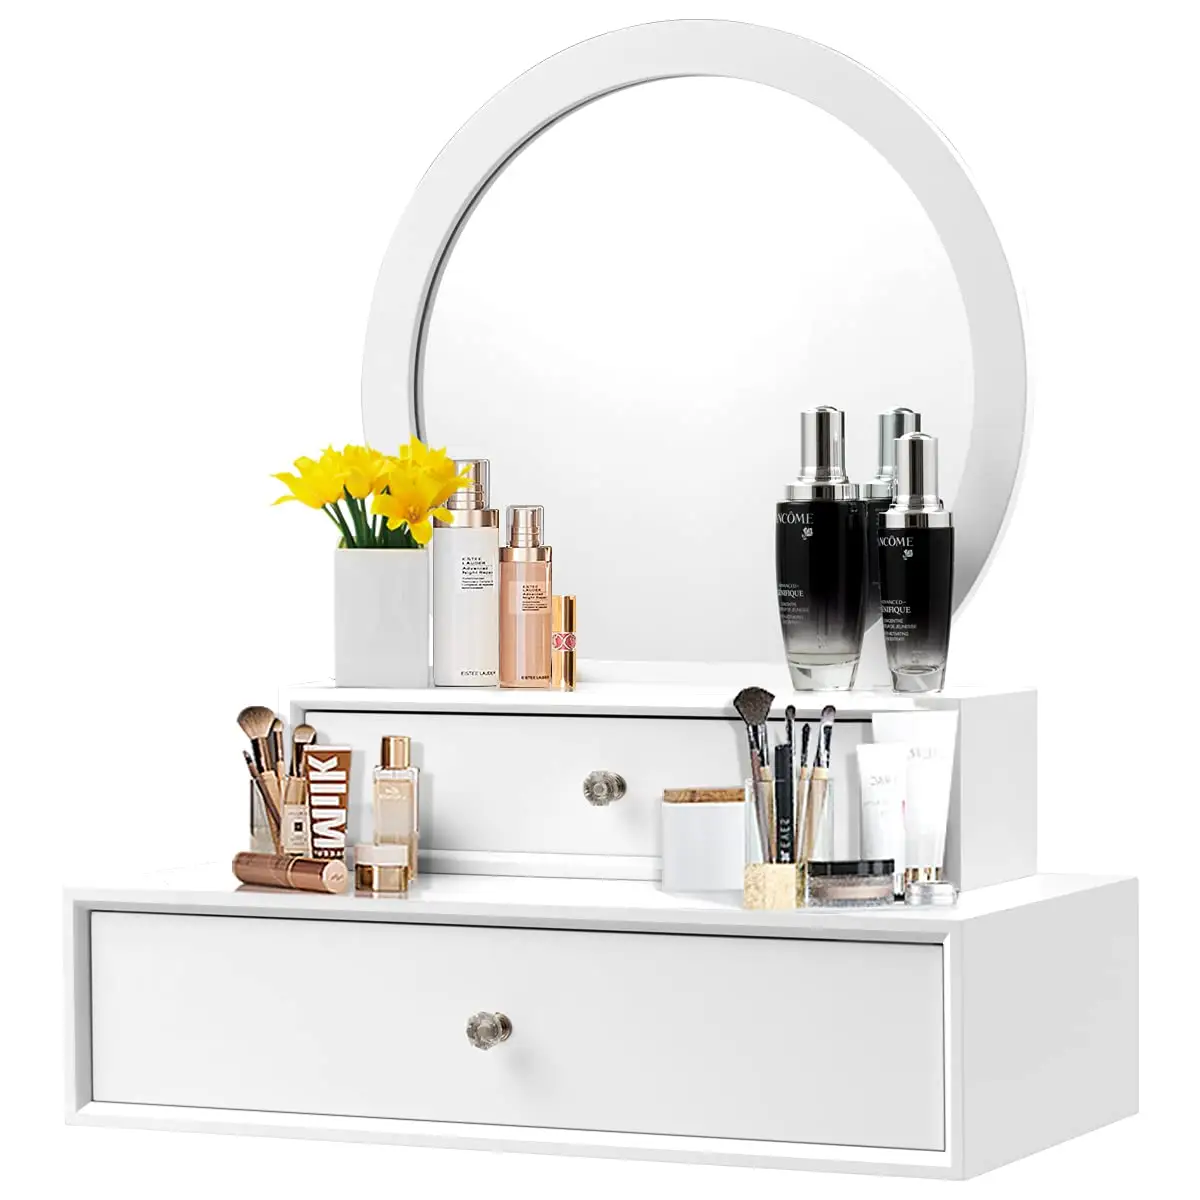 Special wholesale makeup mirror on dresser, dresser with round mirror, 2 removable wooden drawers with crystal ring handles